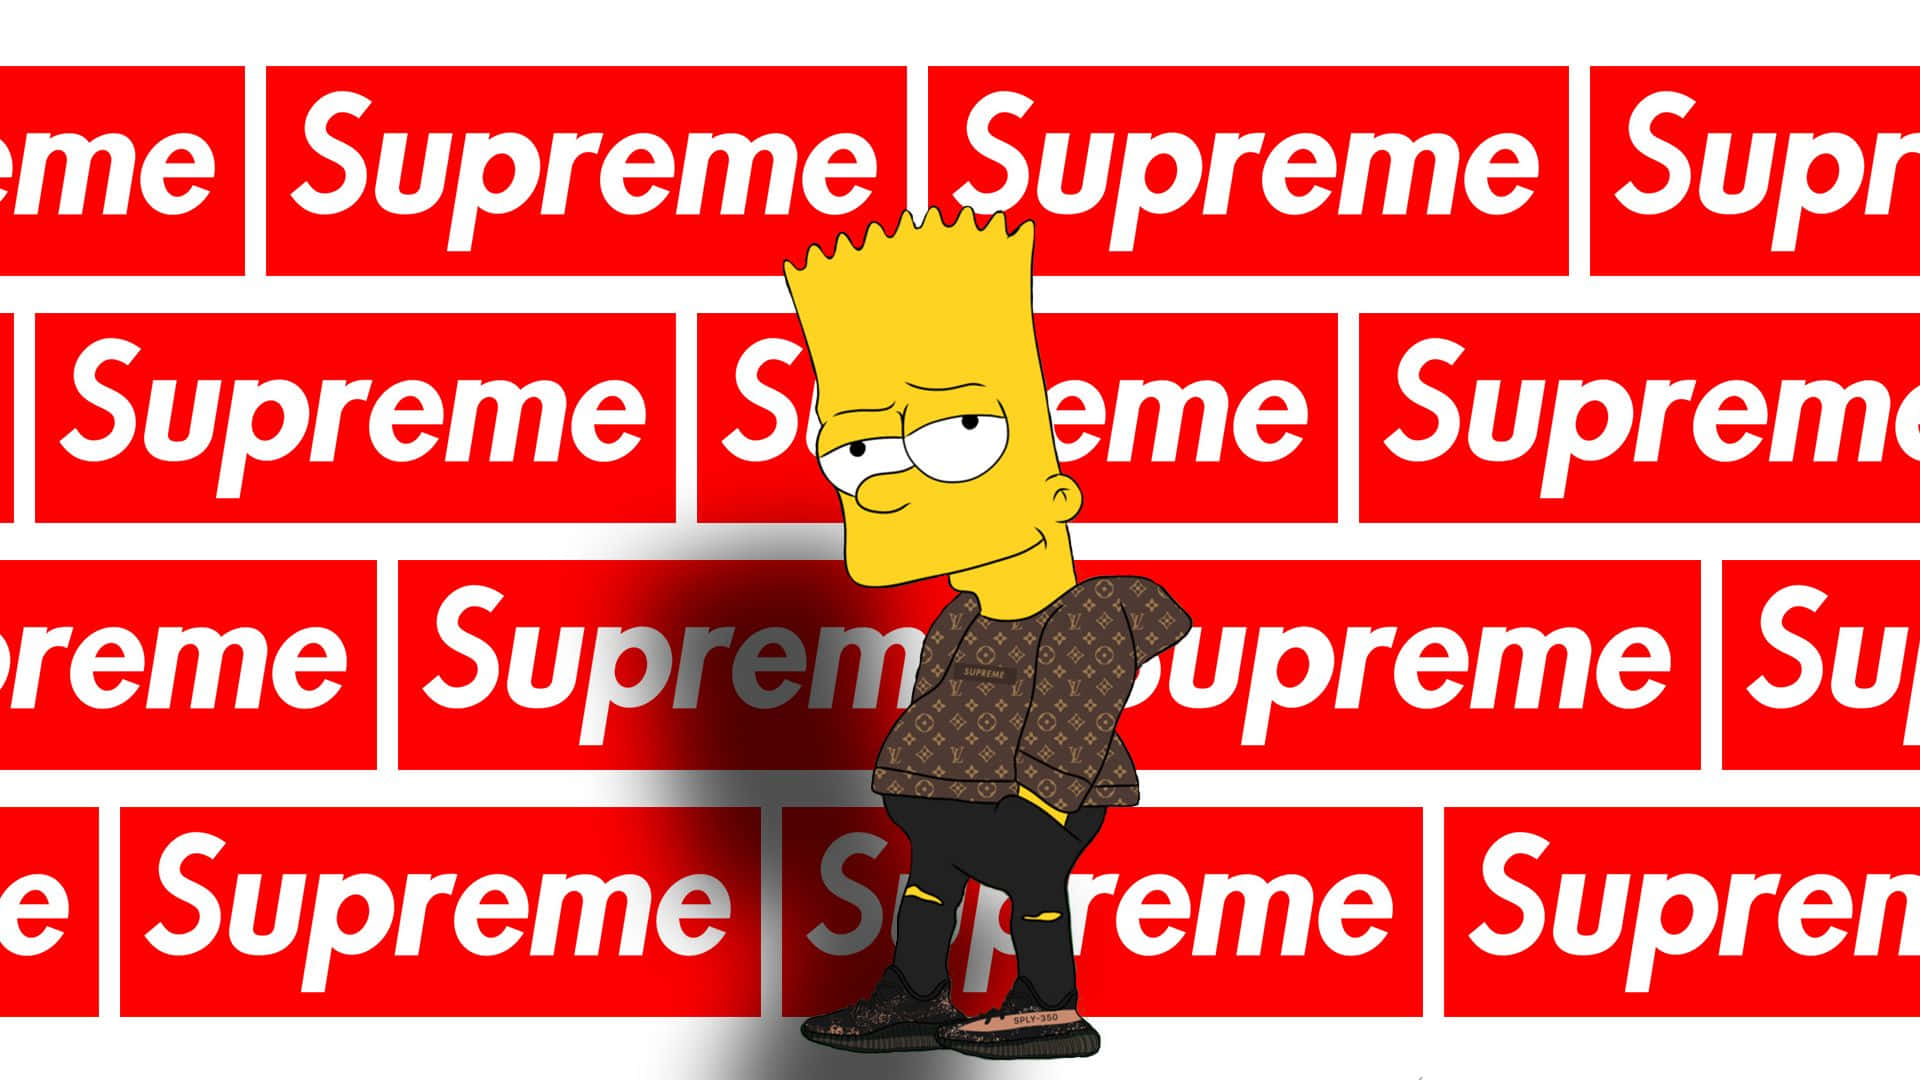 Download Show Your Style with Supreme Drip Wallpaper